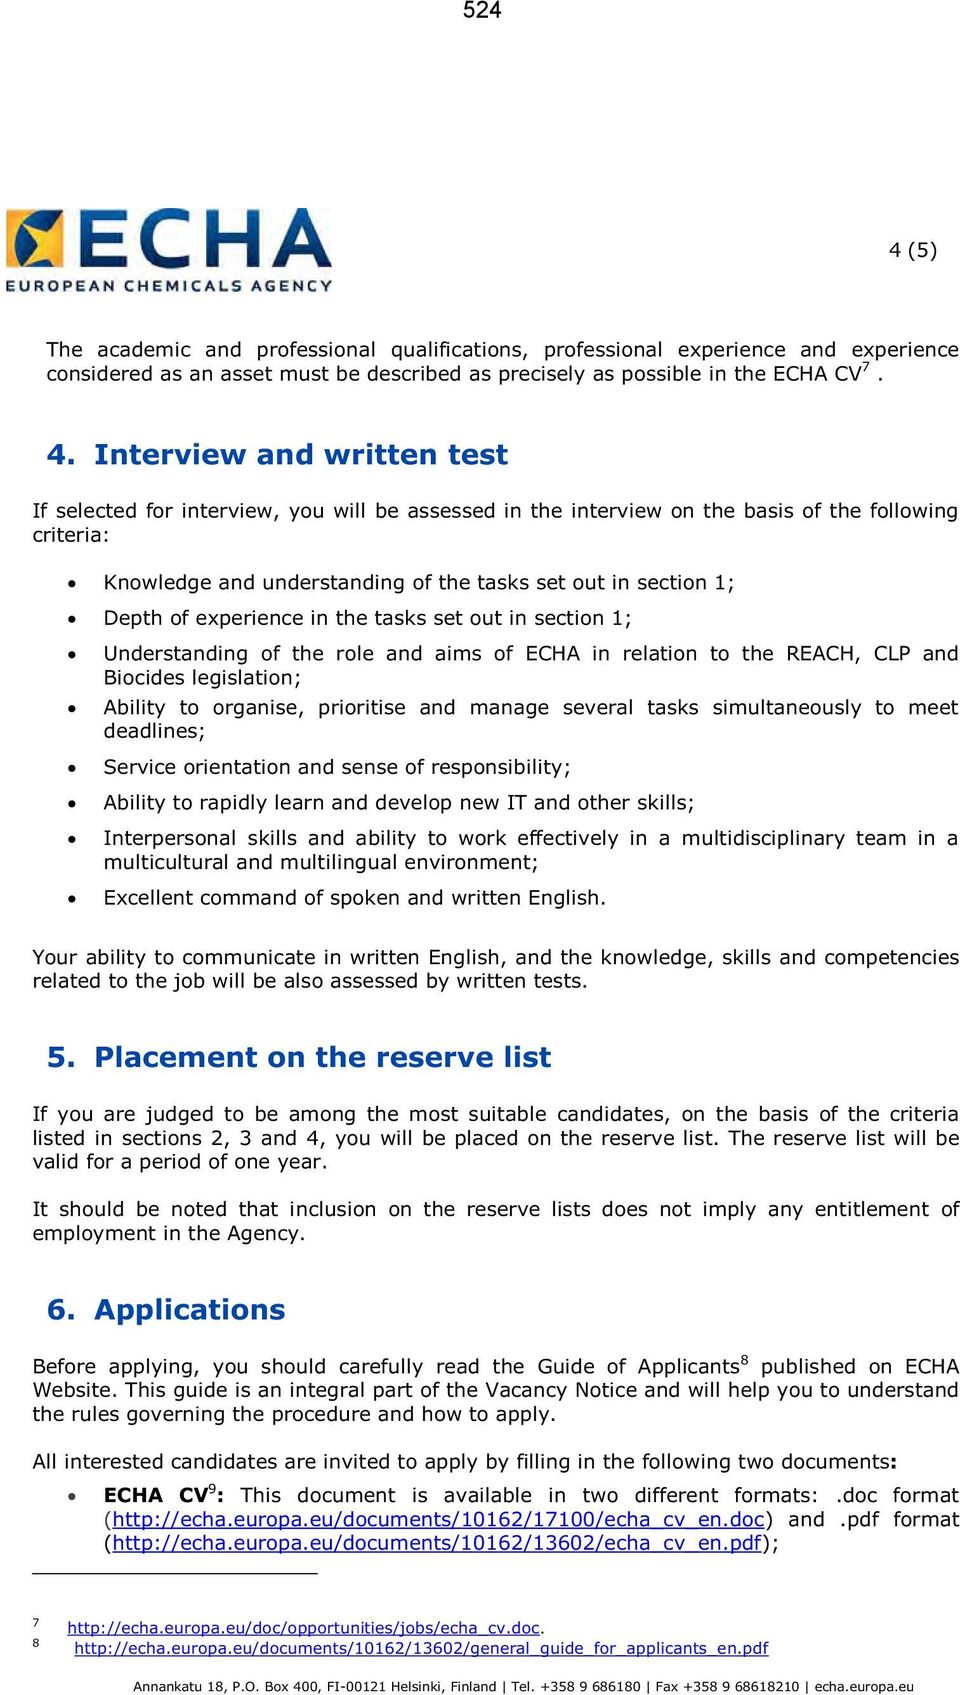 Interview and written test If selected for interview, you will be assessed in the interview on the basis of the following criteria: Knowledge and understanding of the tasks set out in section 1;